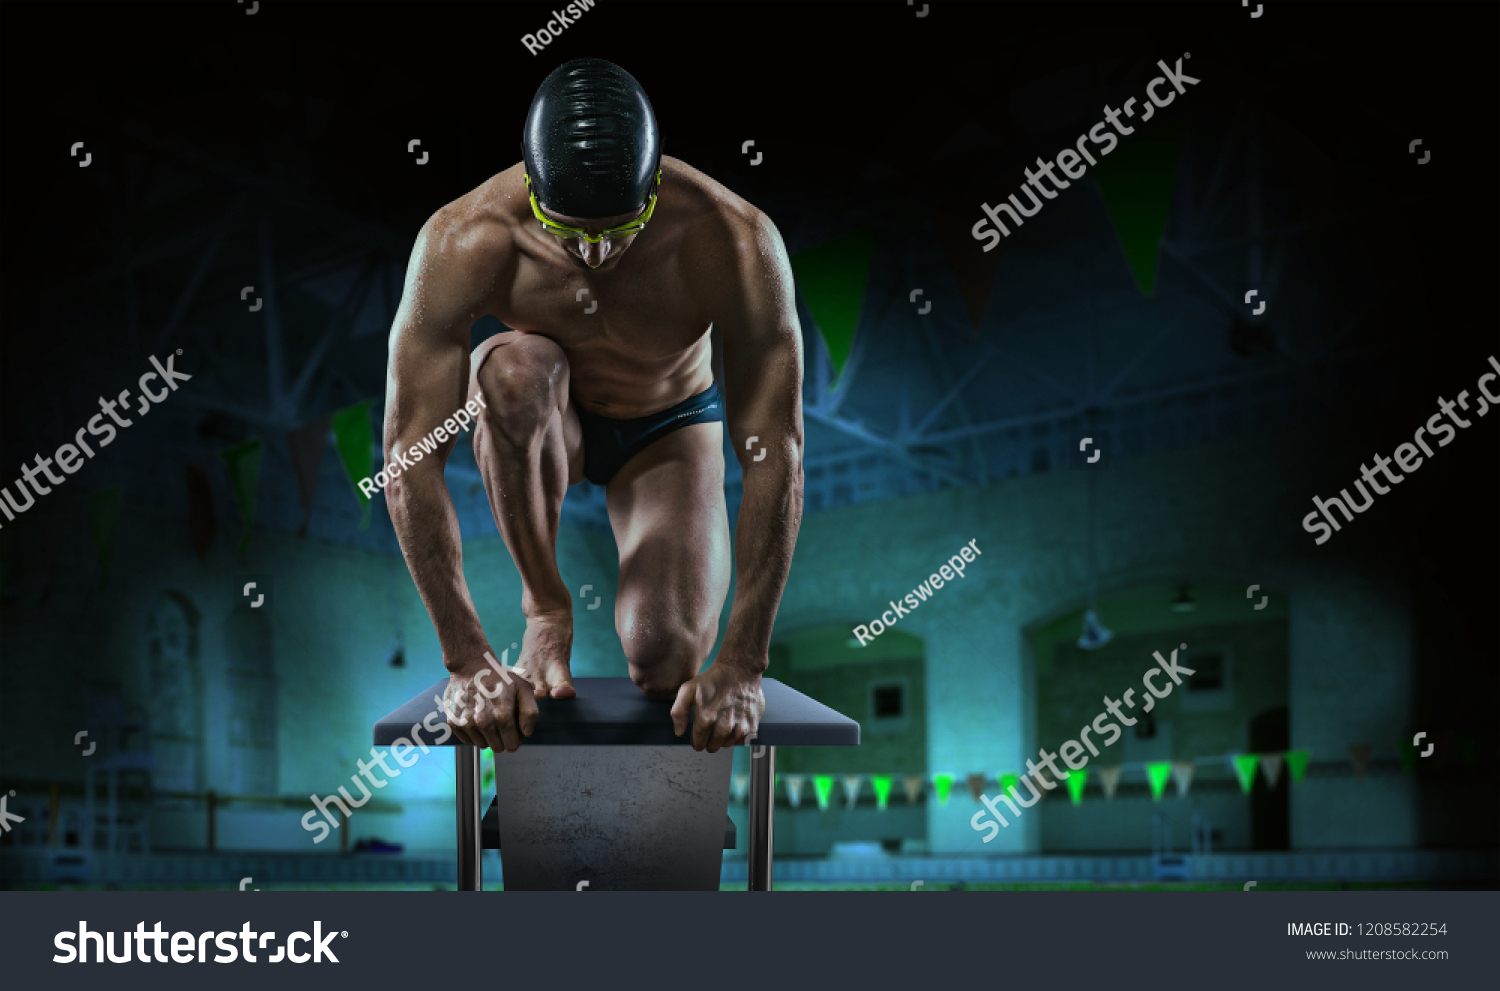 Swimming pool. Muscular swimmer ready to jump. #1208582254